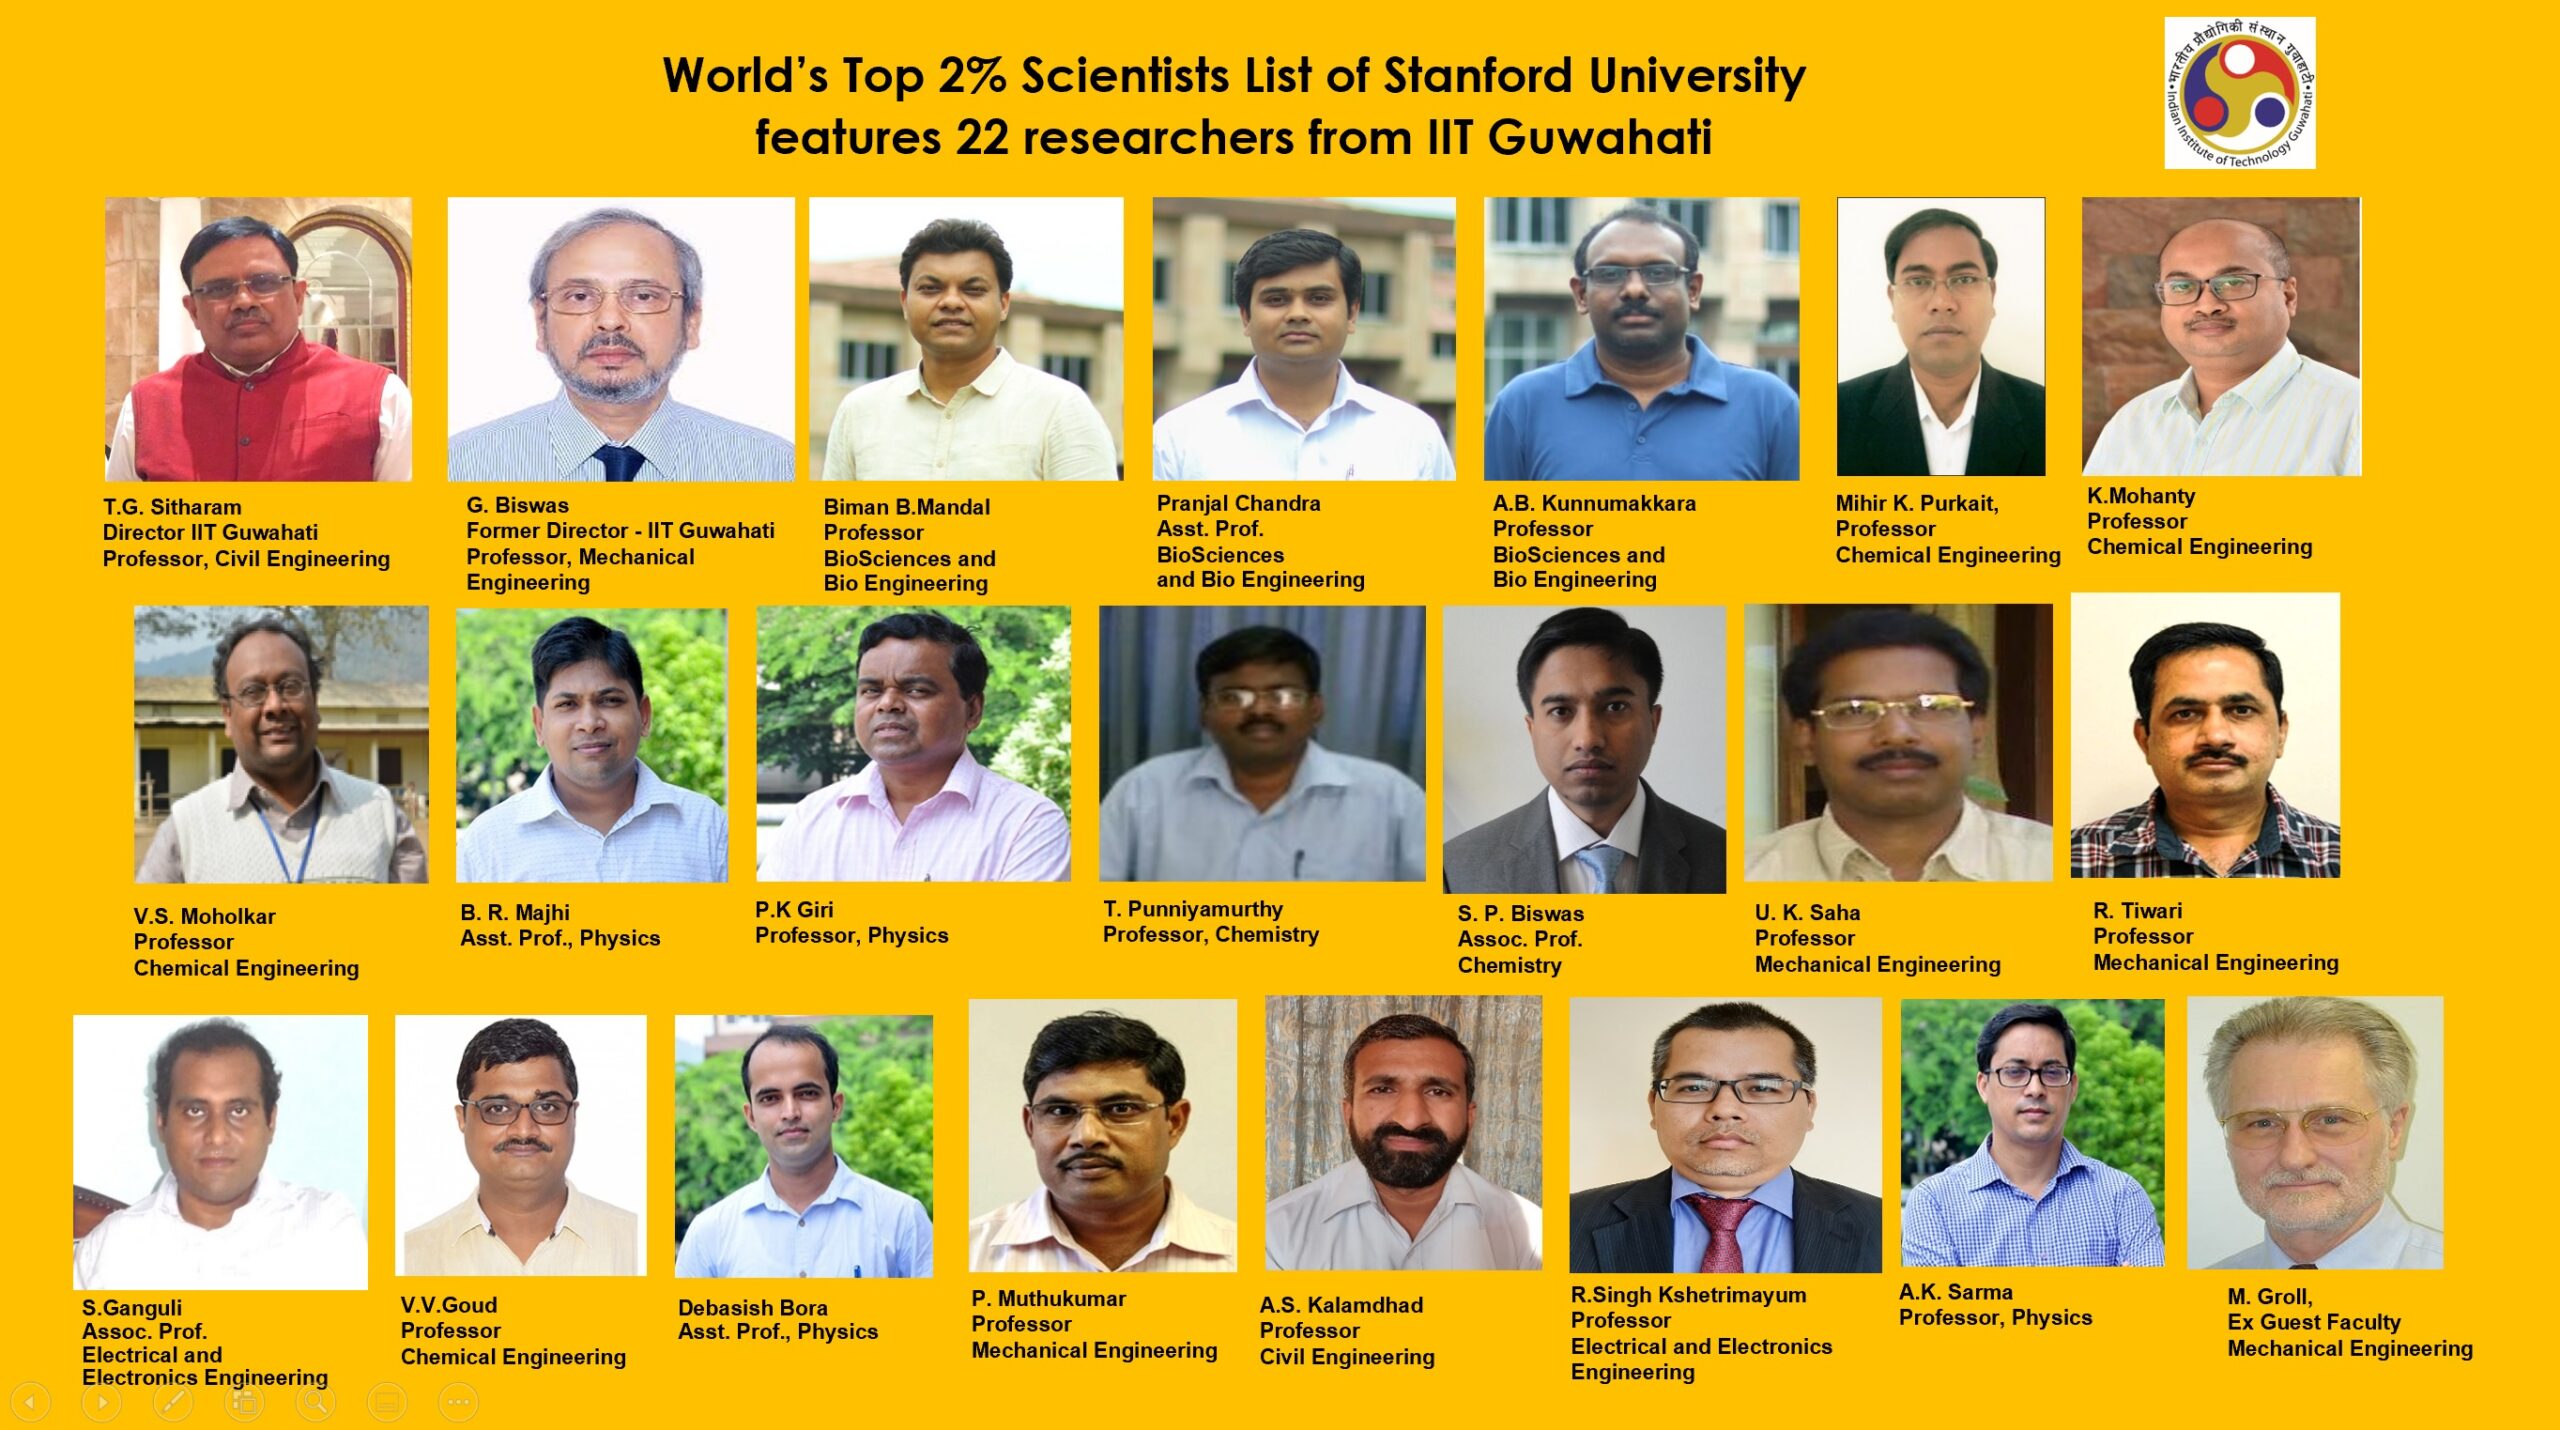 22 researchers from IIT Guwahati feature in the World’s Top 2